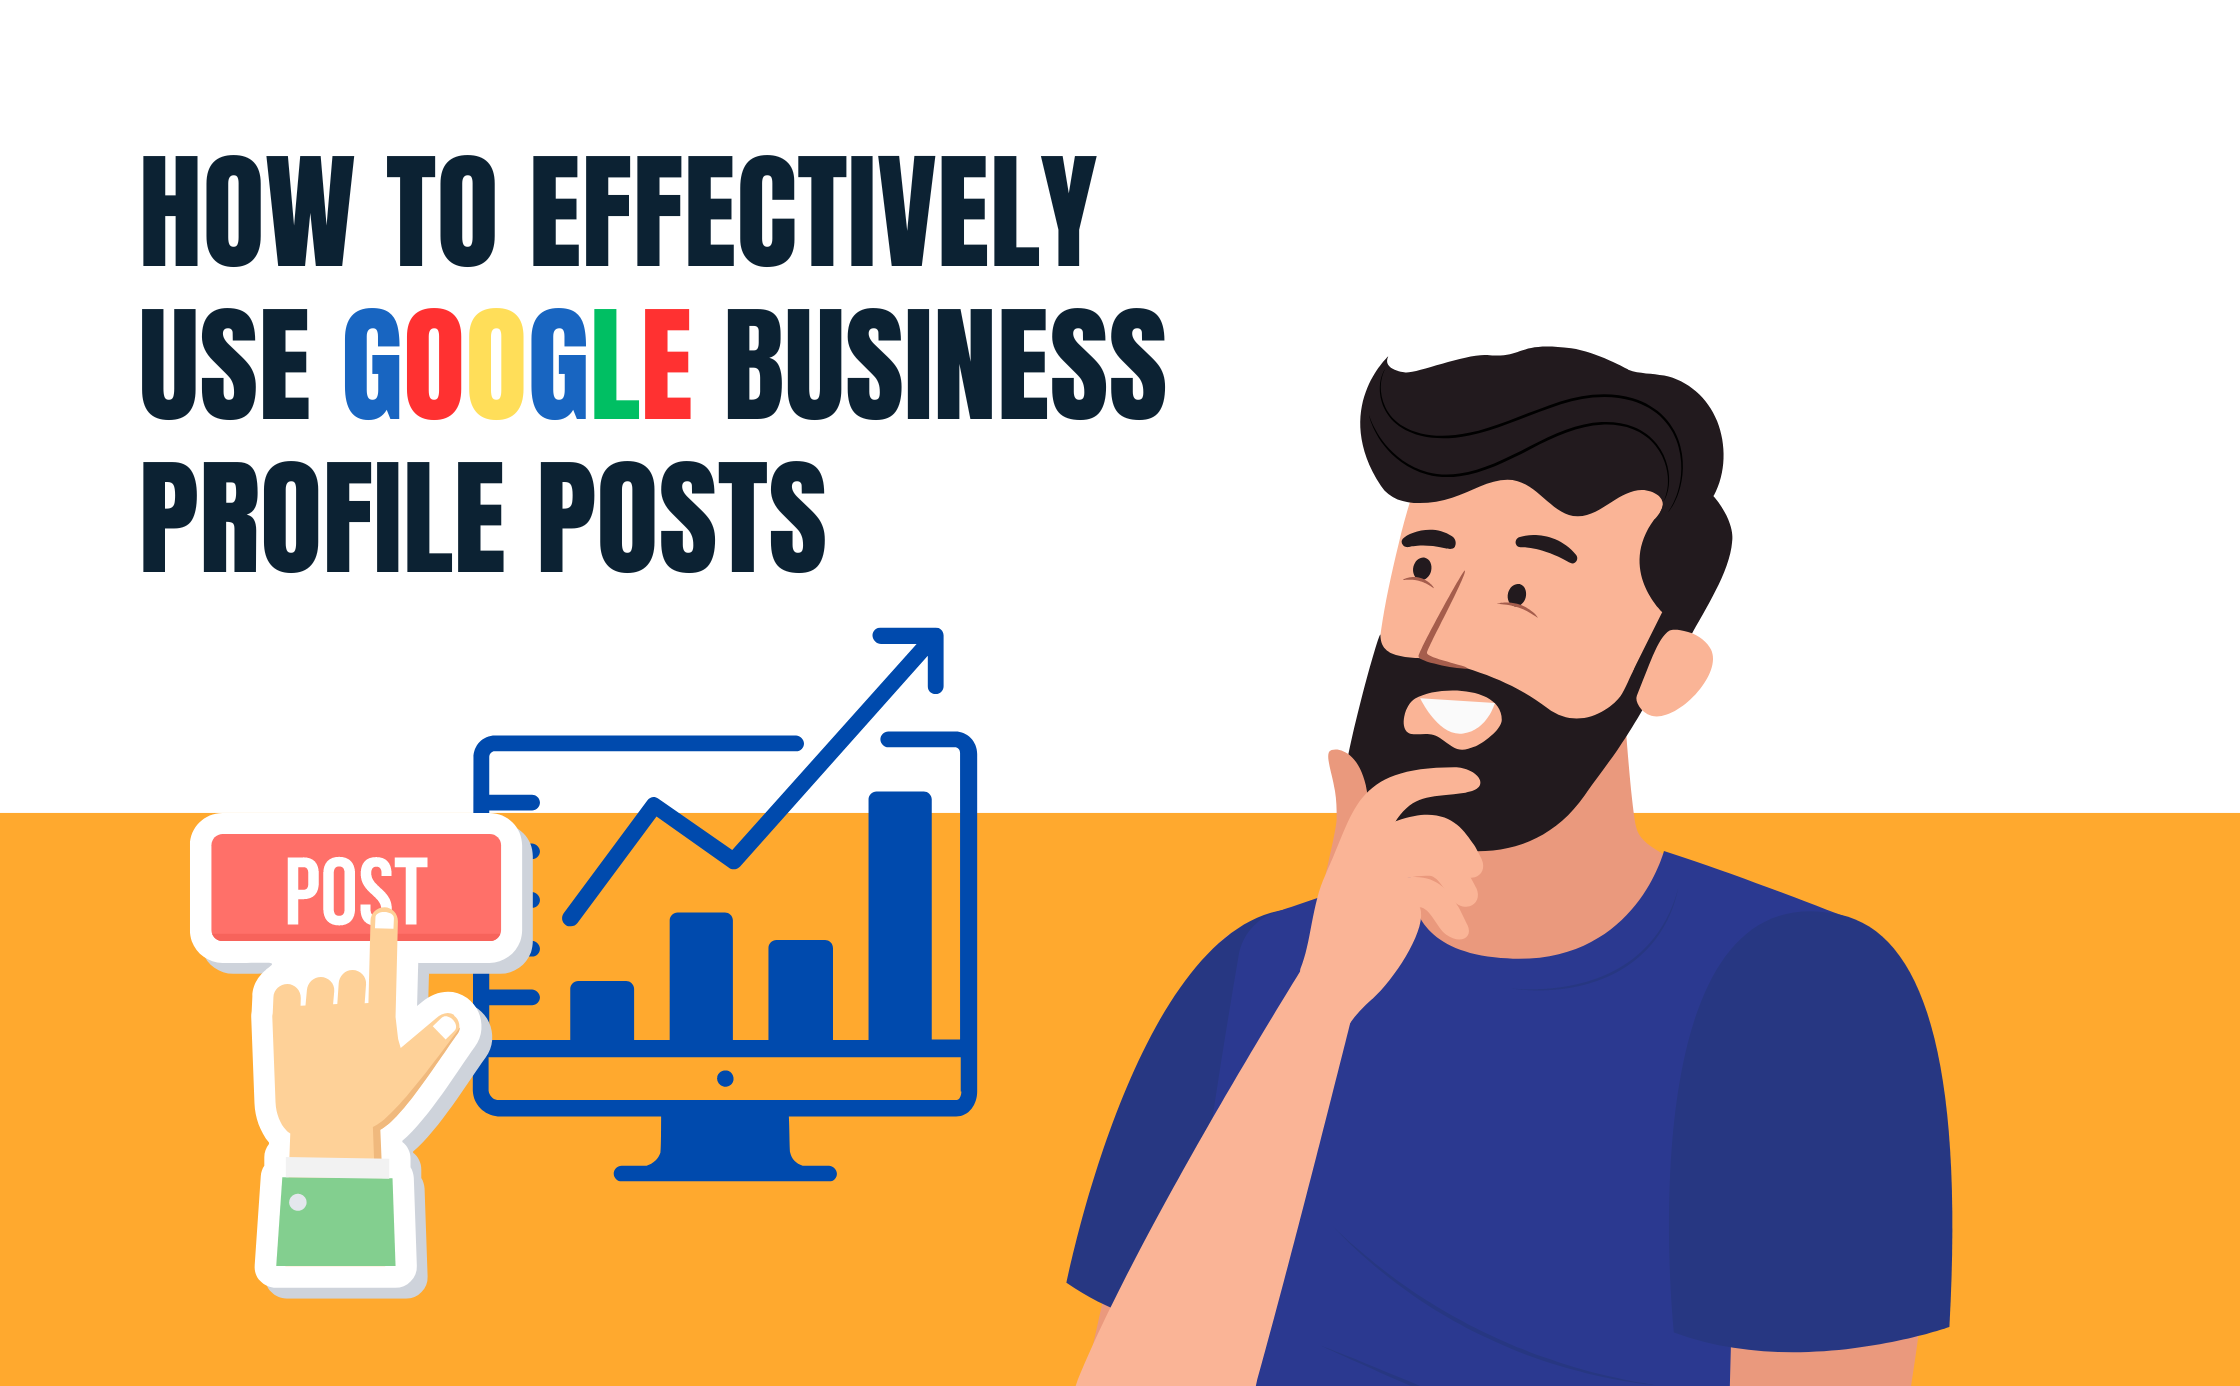 How to Effectively Use Google Business Profile Posts